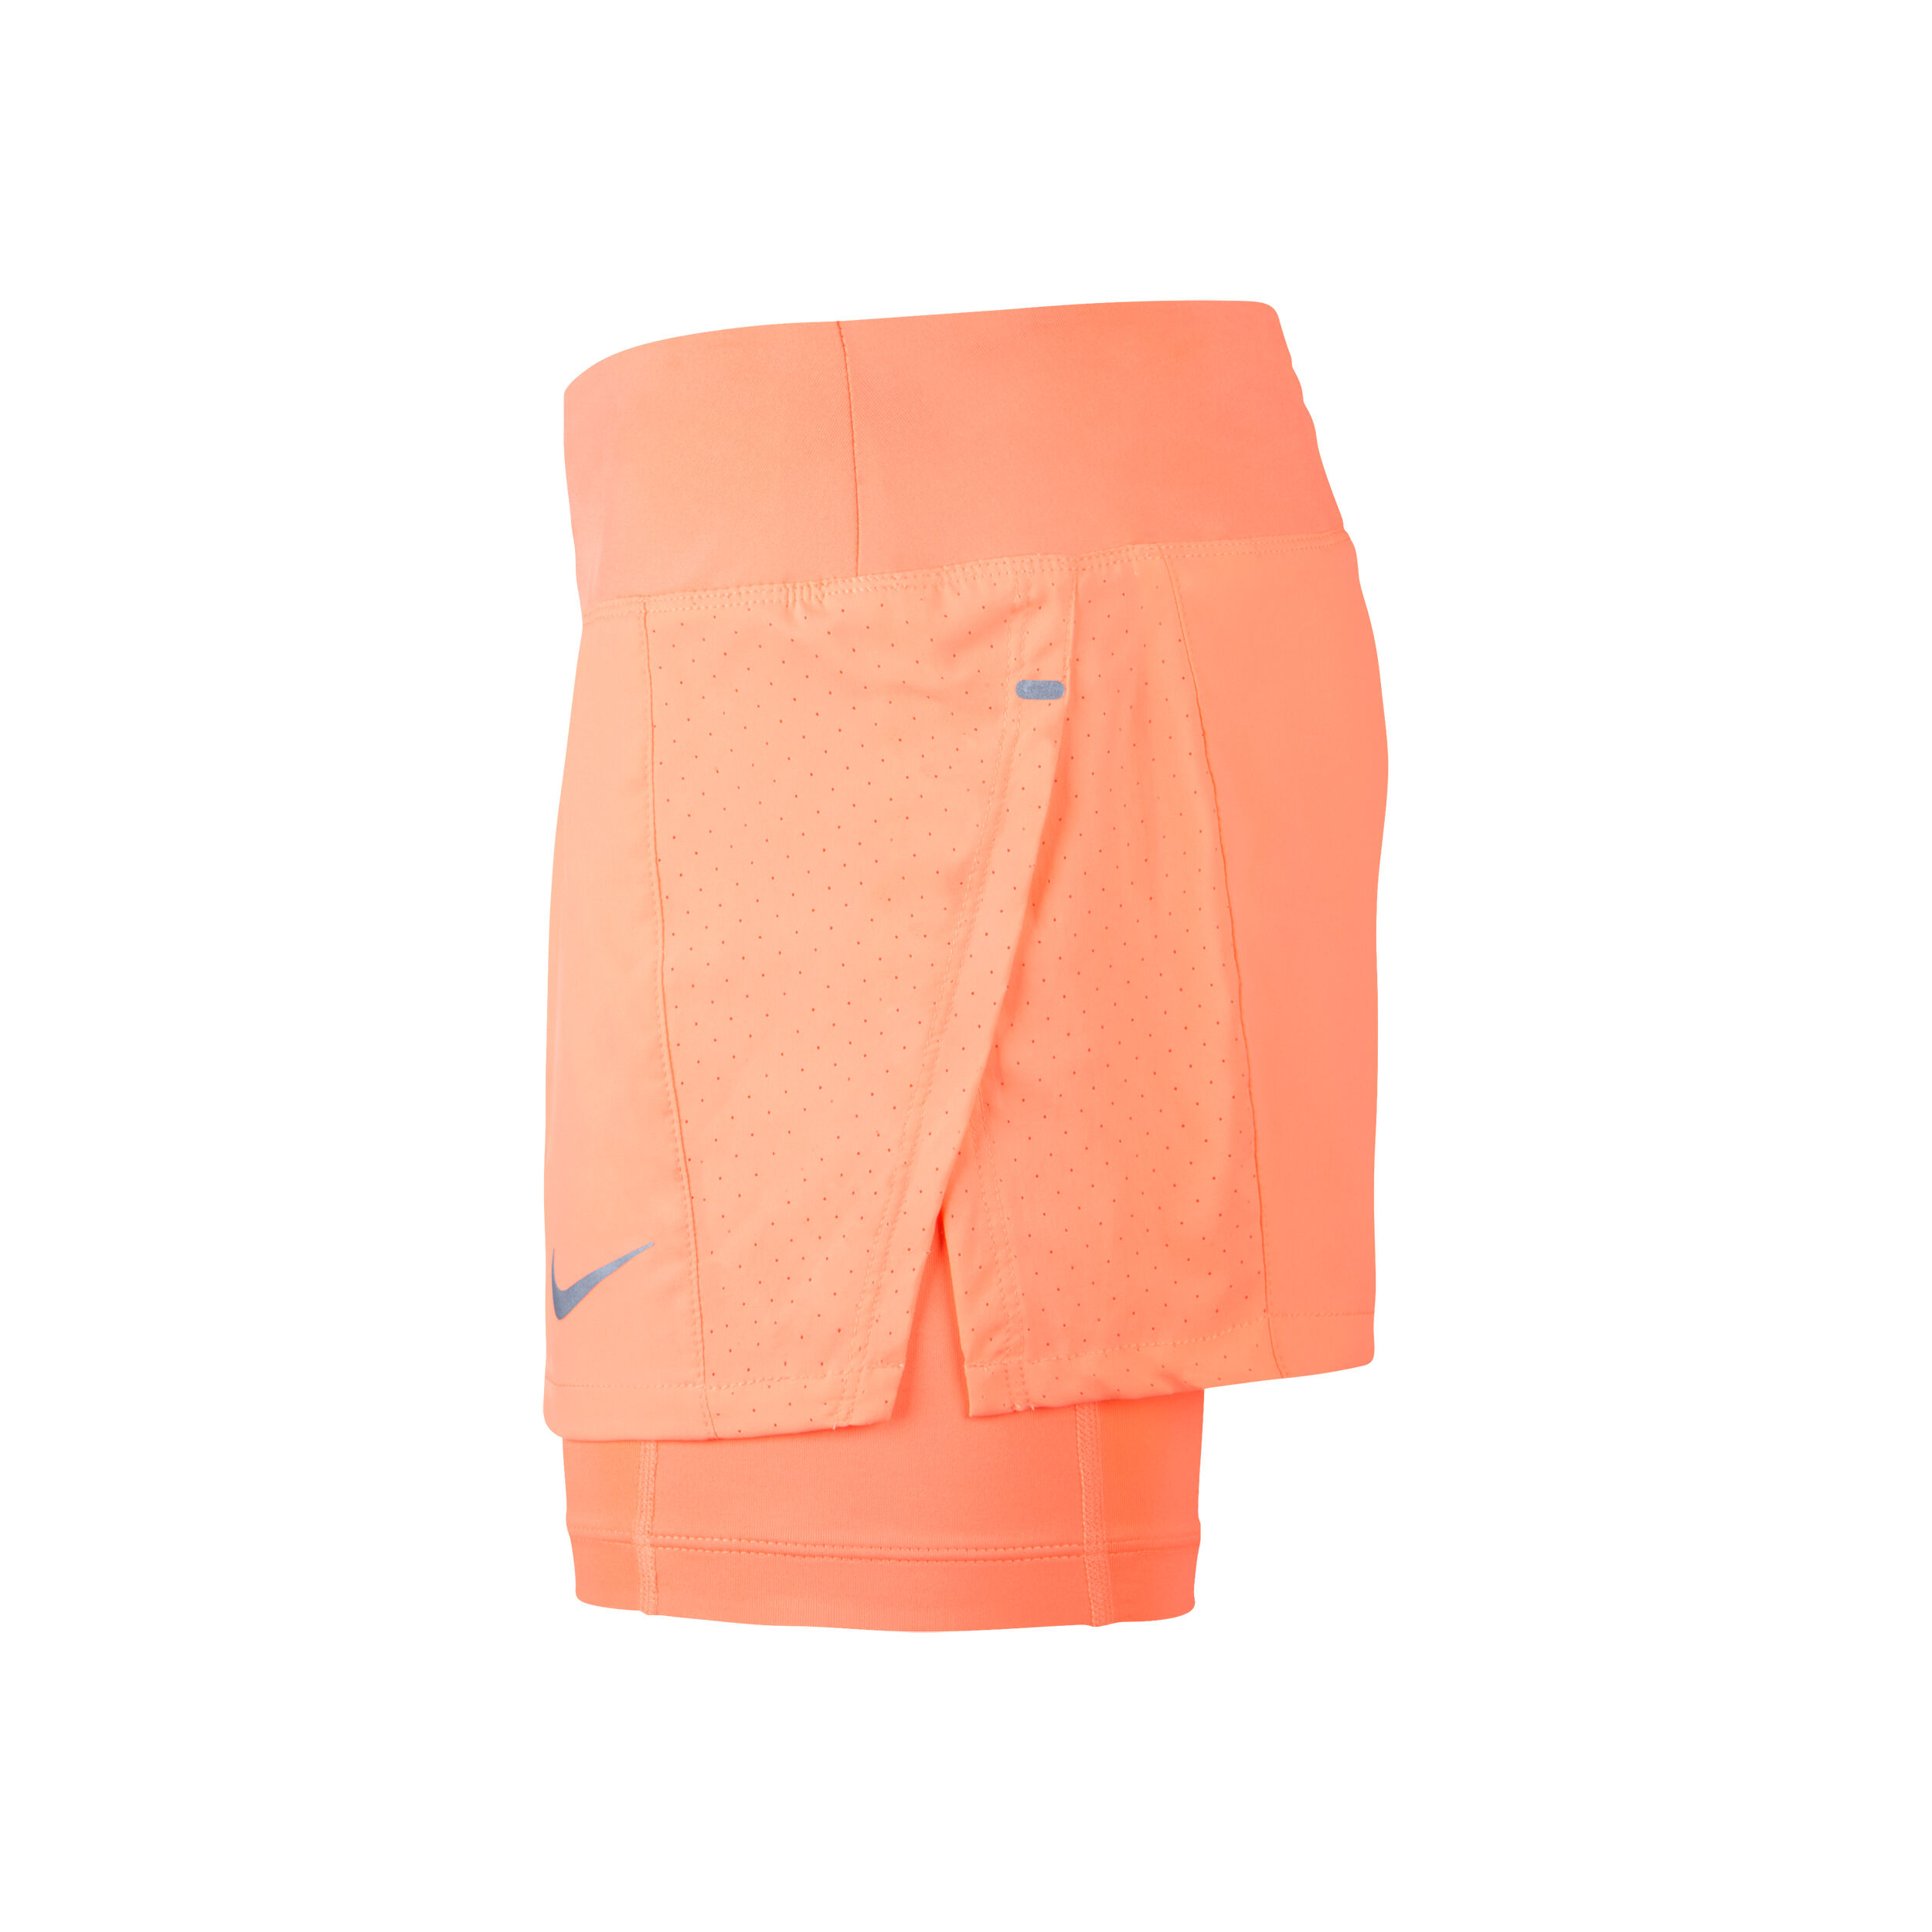 nike eclipse 2 in 1 shorts womens